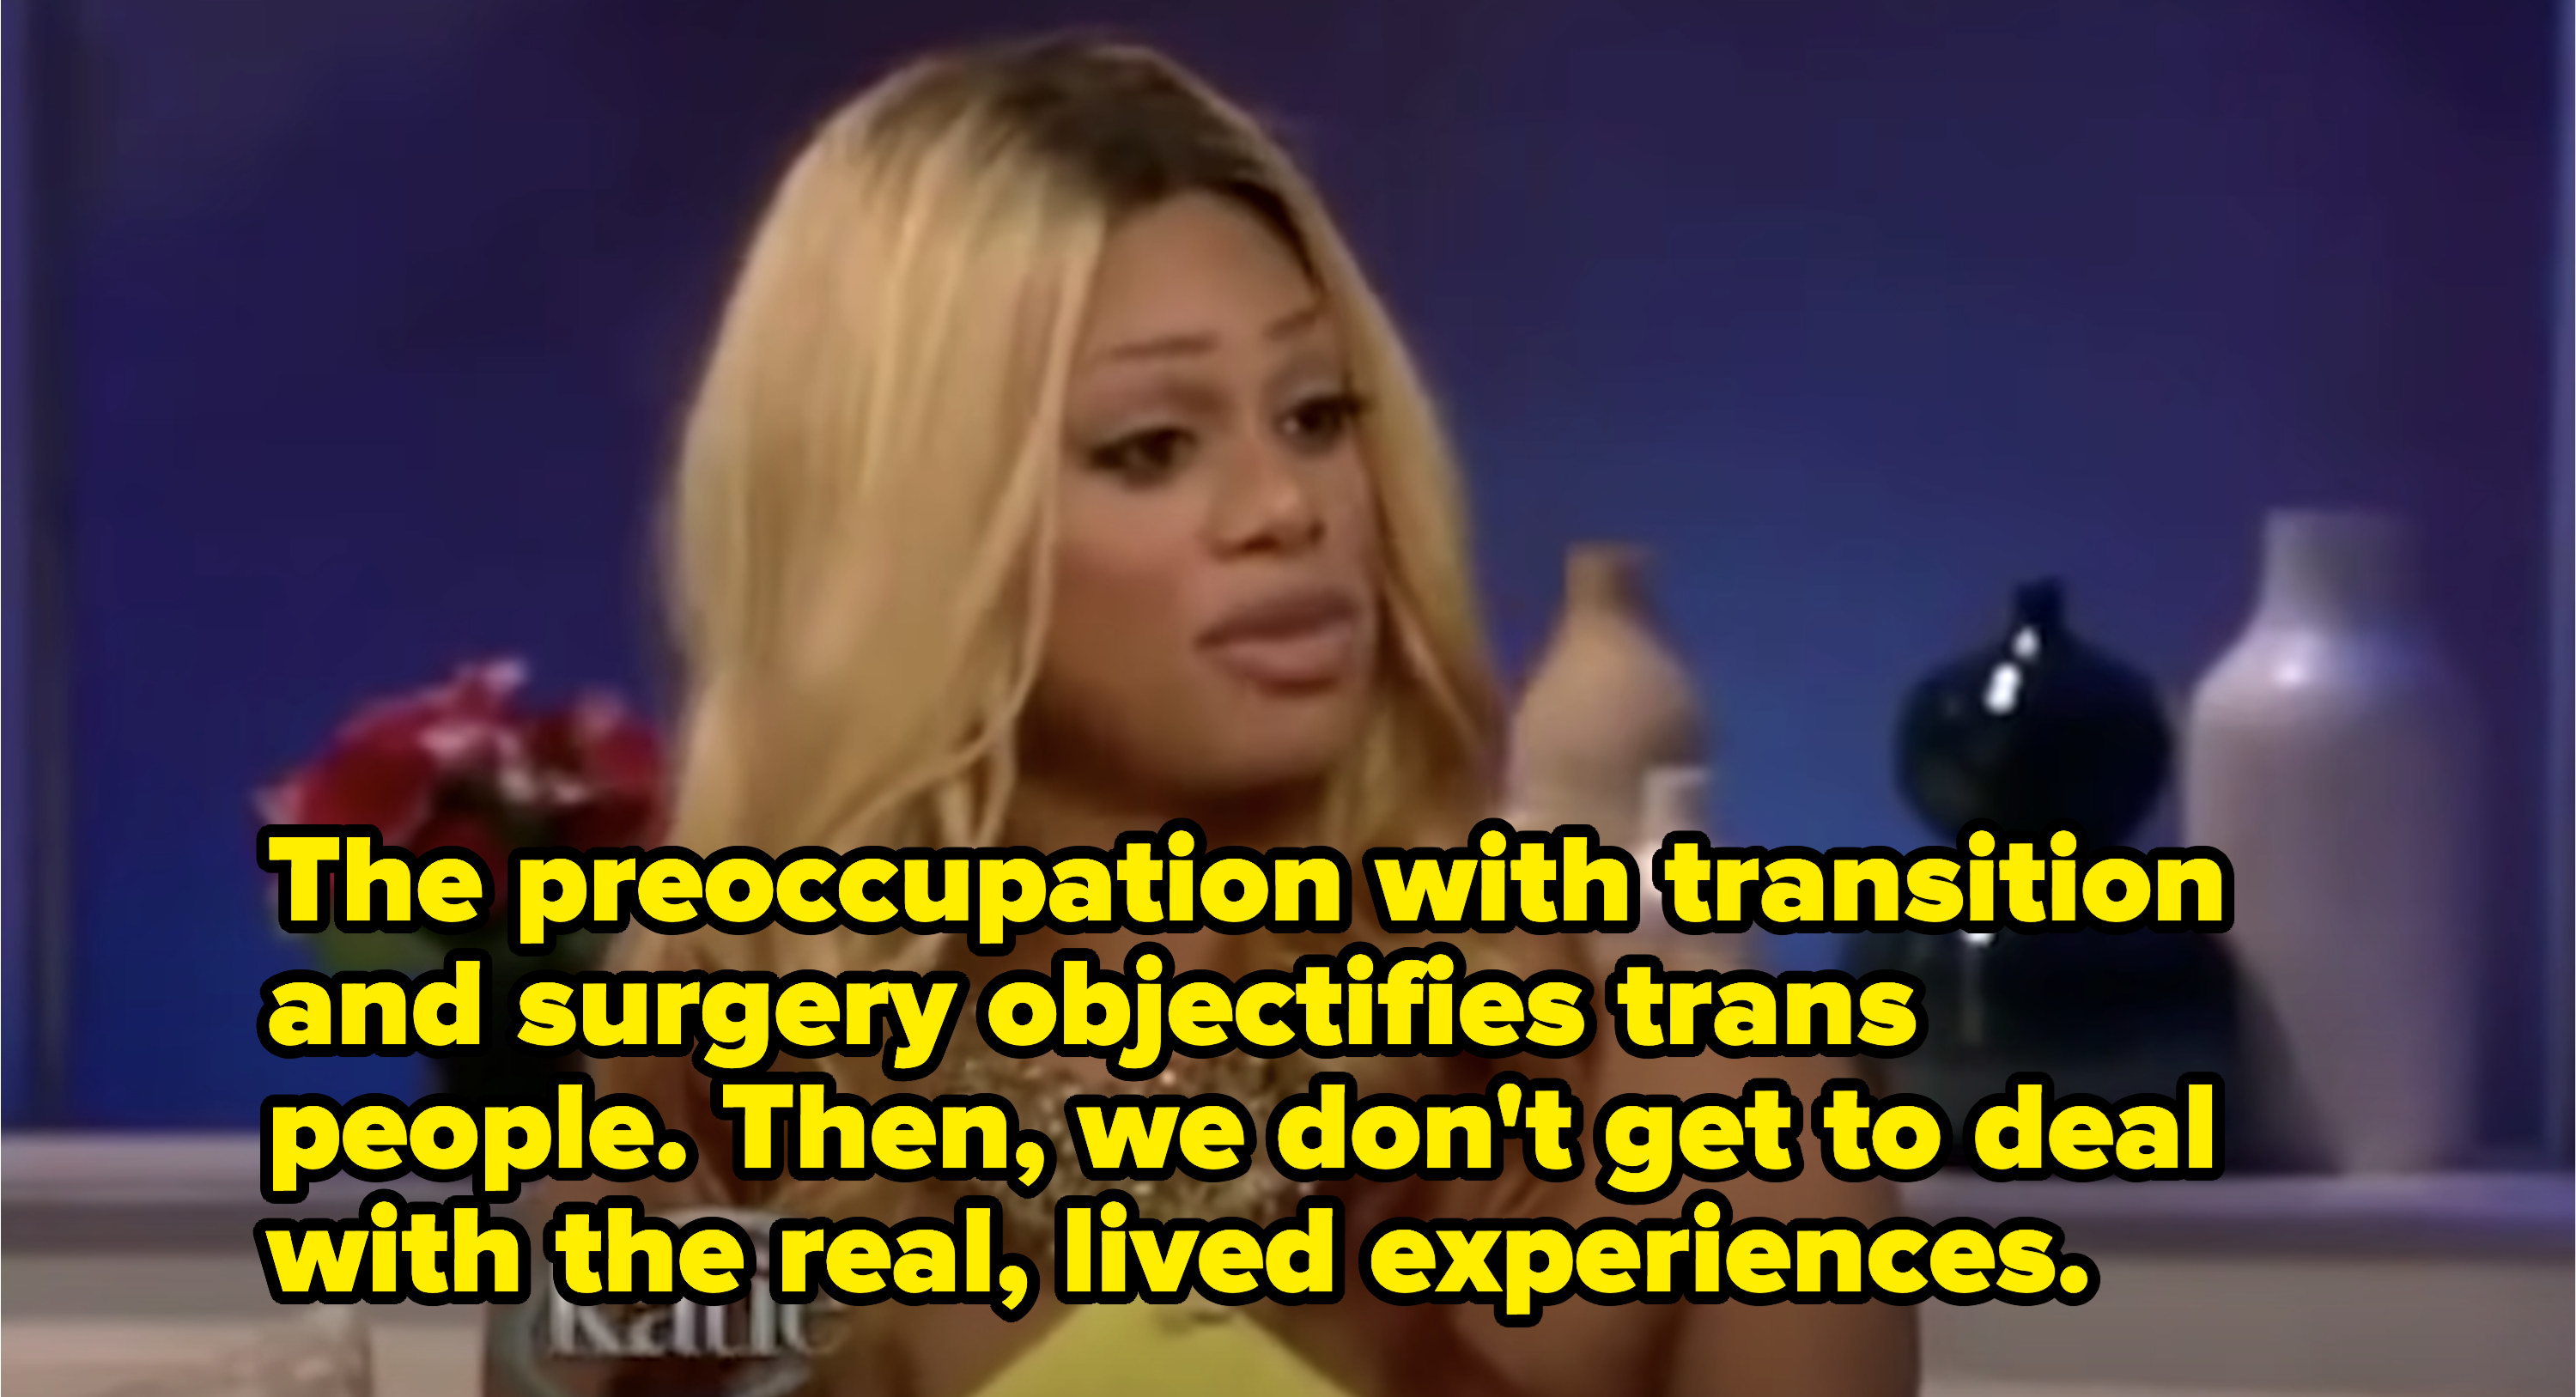 Laverne saying, the preoccupation of transition and surgery takes away from real experience and objectifies trans people